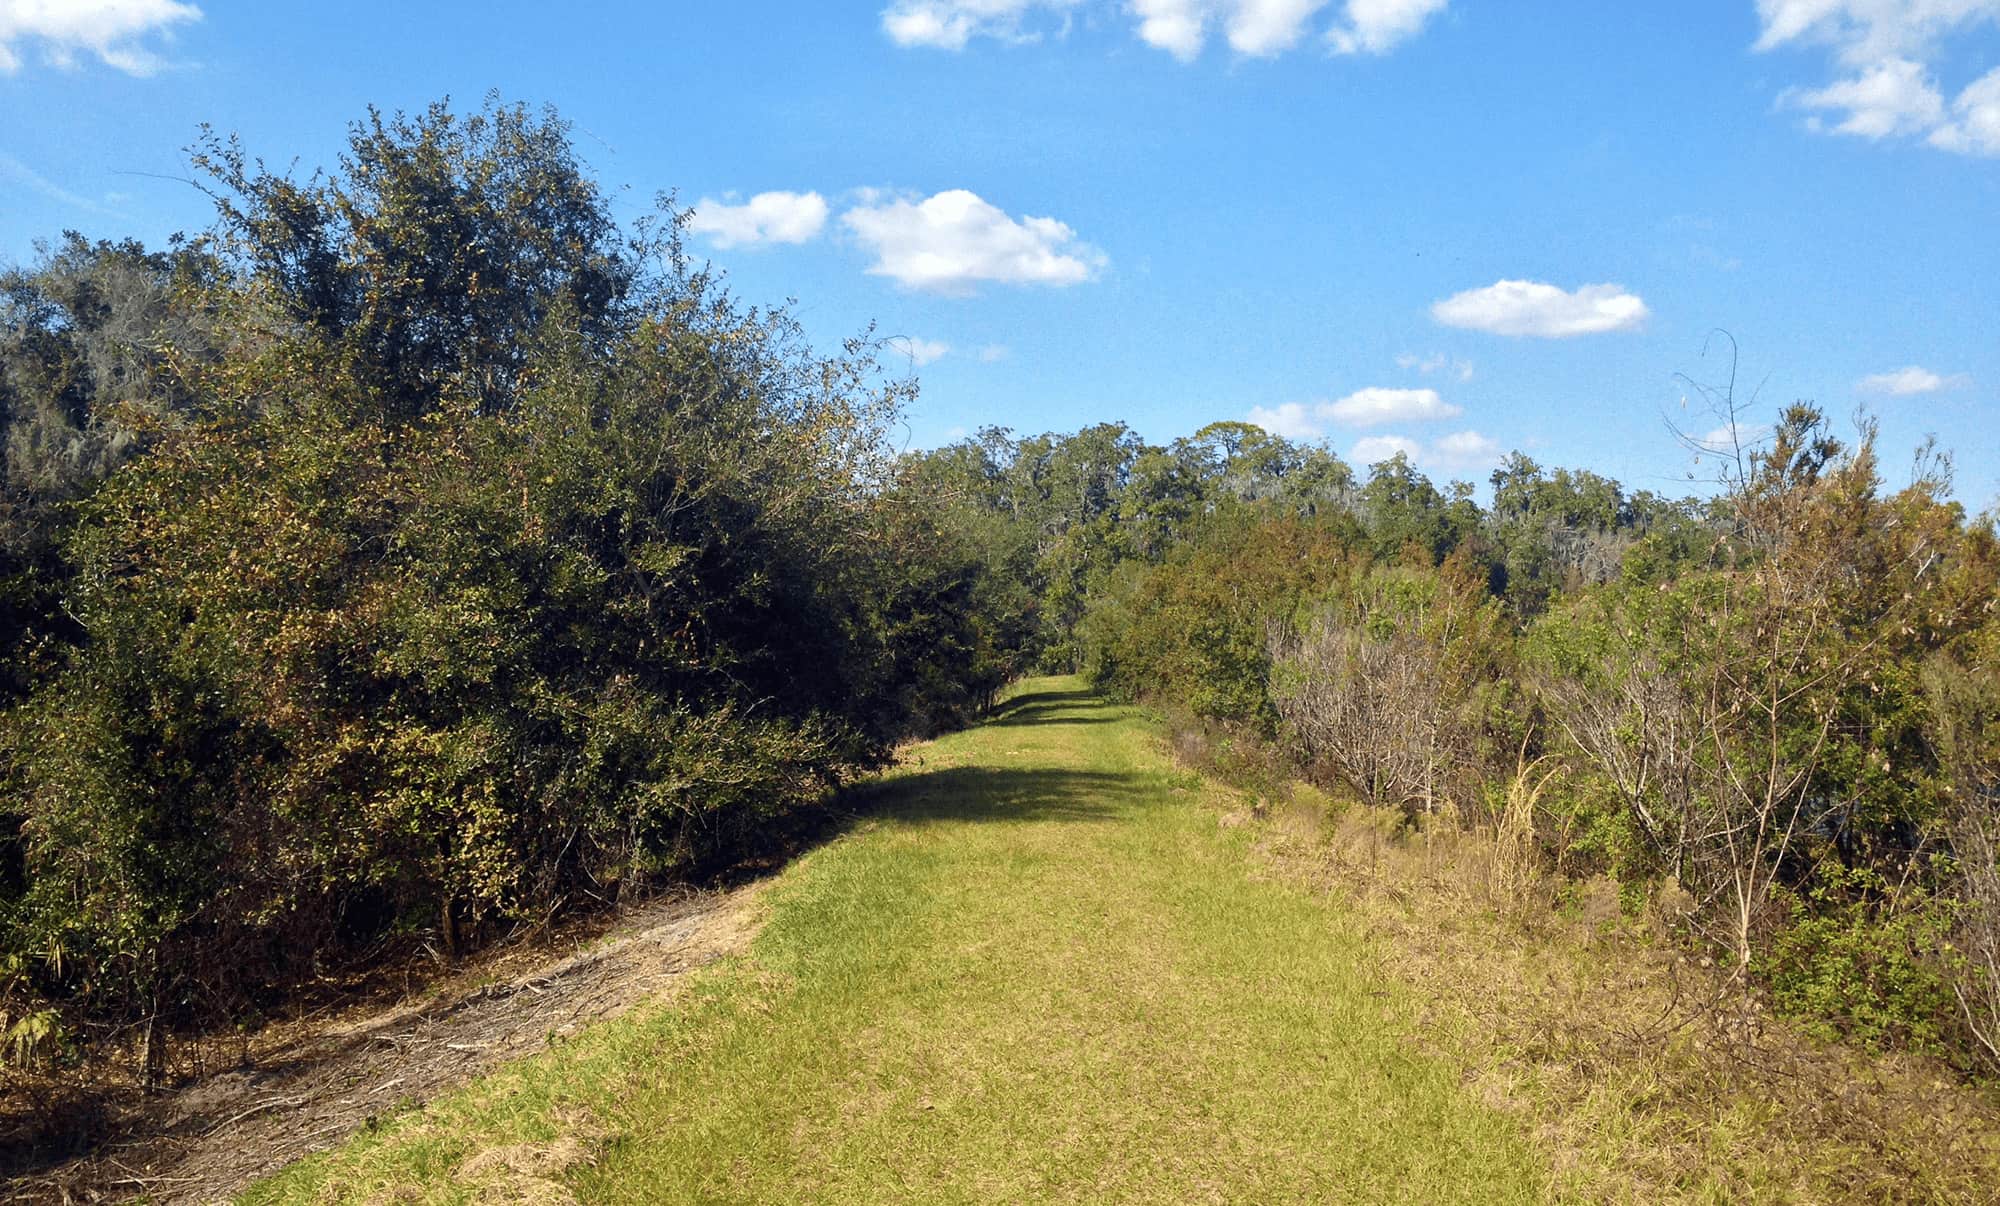 Grassy Panther Point Trail at Marshall Hampton Reserve in Winter Haven, FL